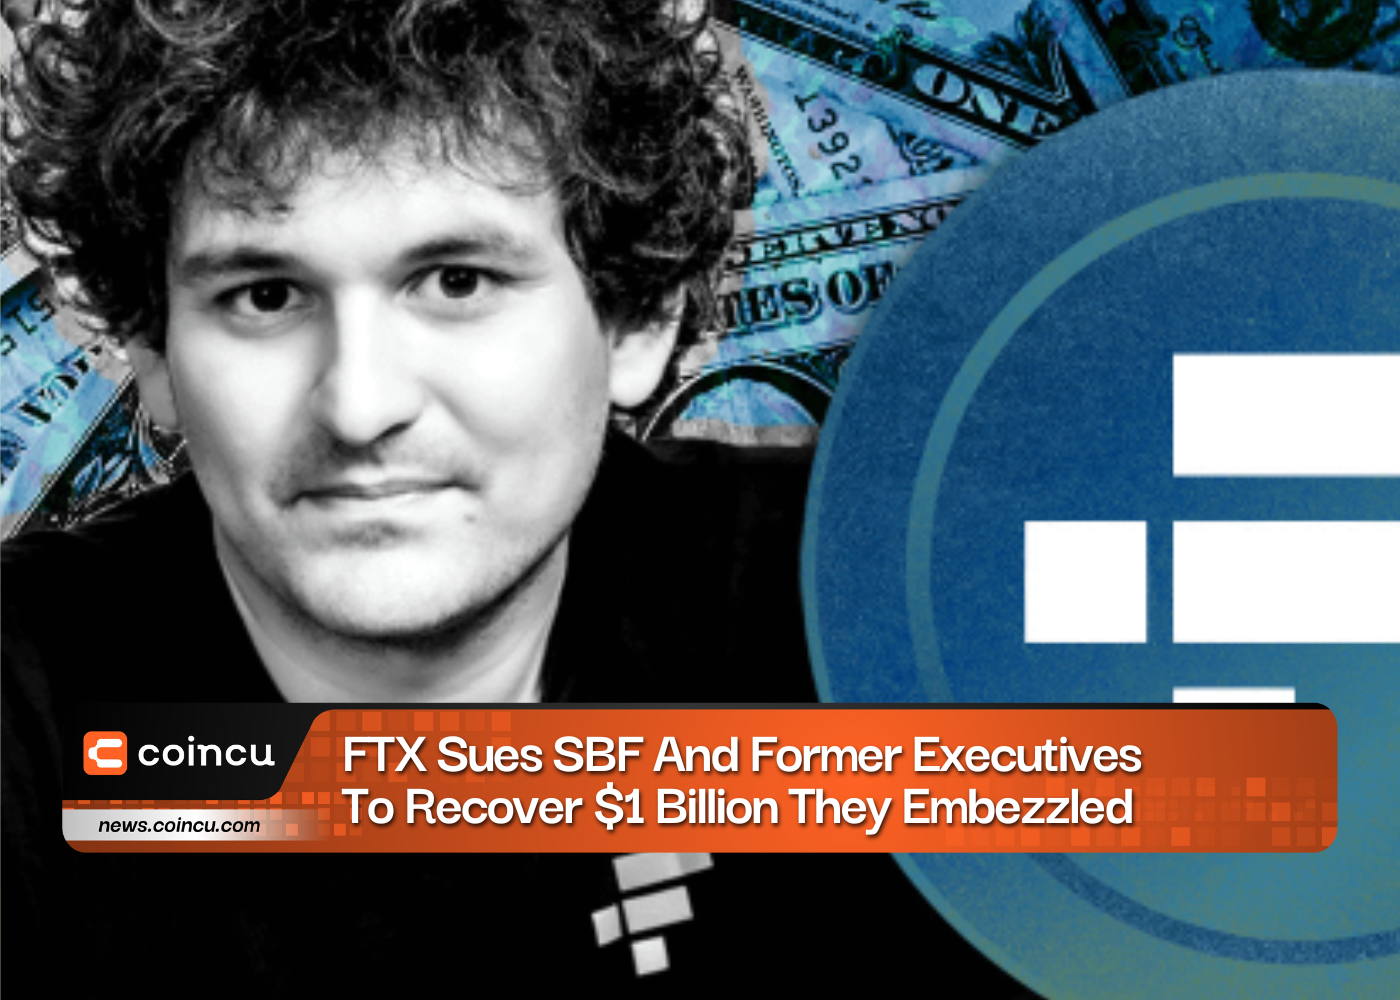 FTX Sues SBF And Former Executives To Recover $1 Billion They Embezzled